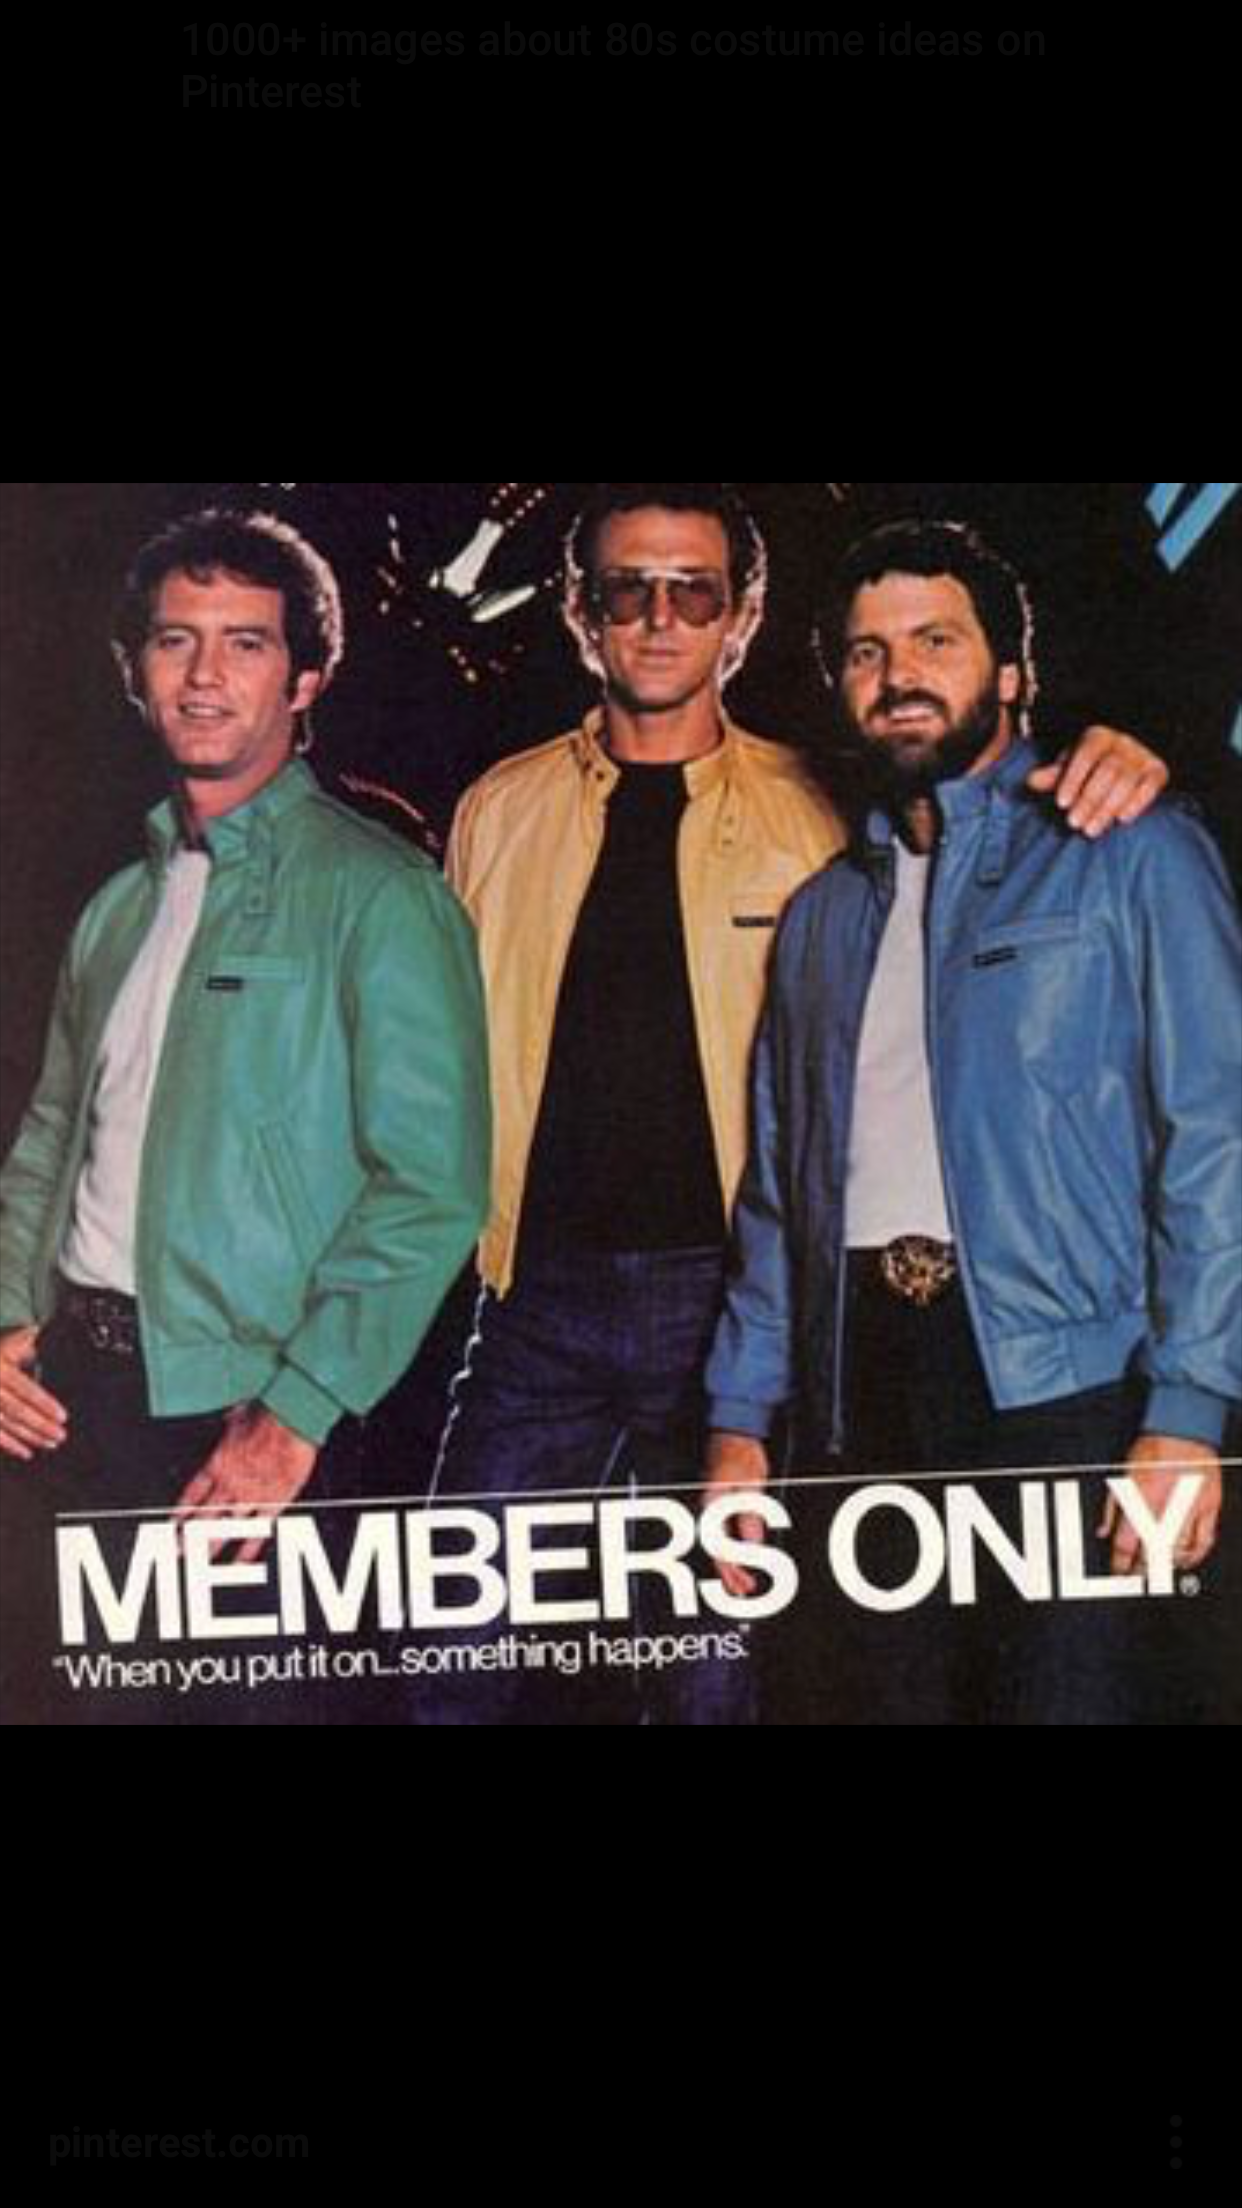 members only jacket 1970 - Members Only When you put it on something happens